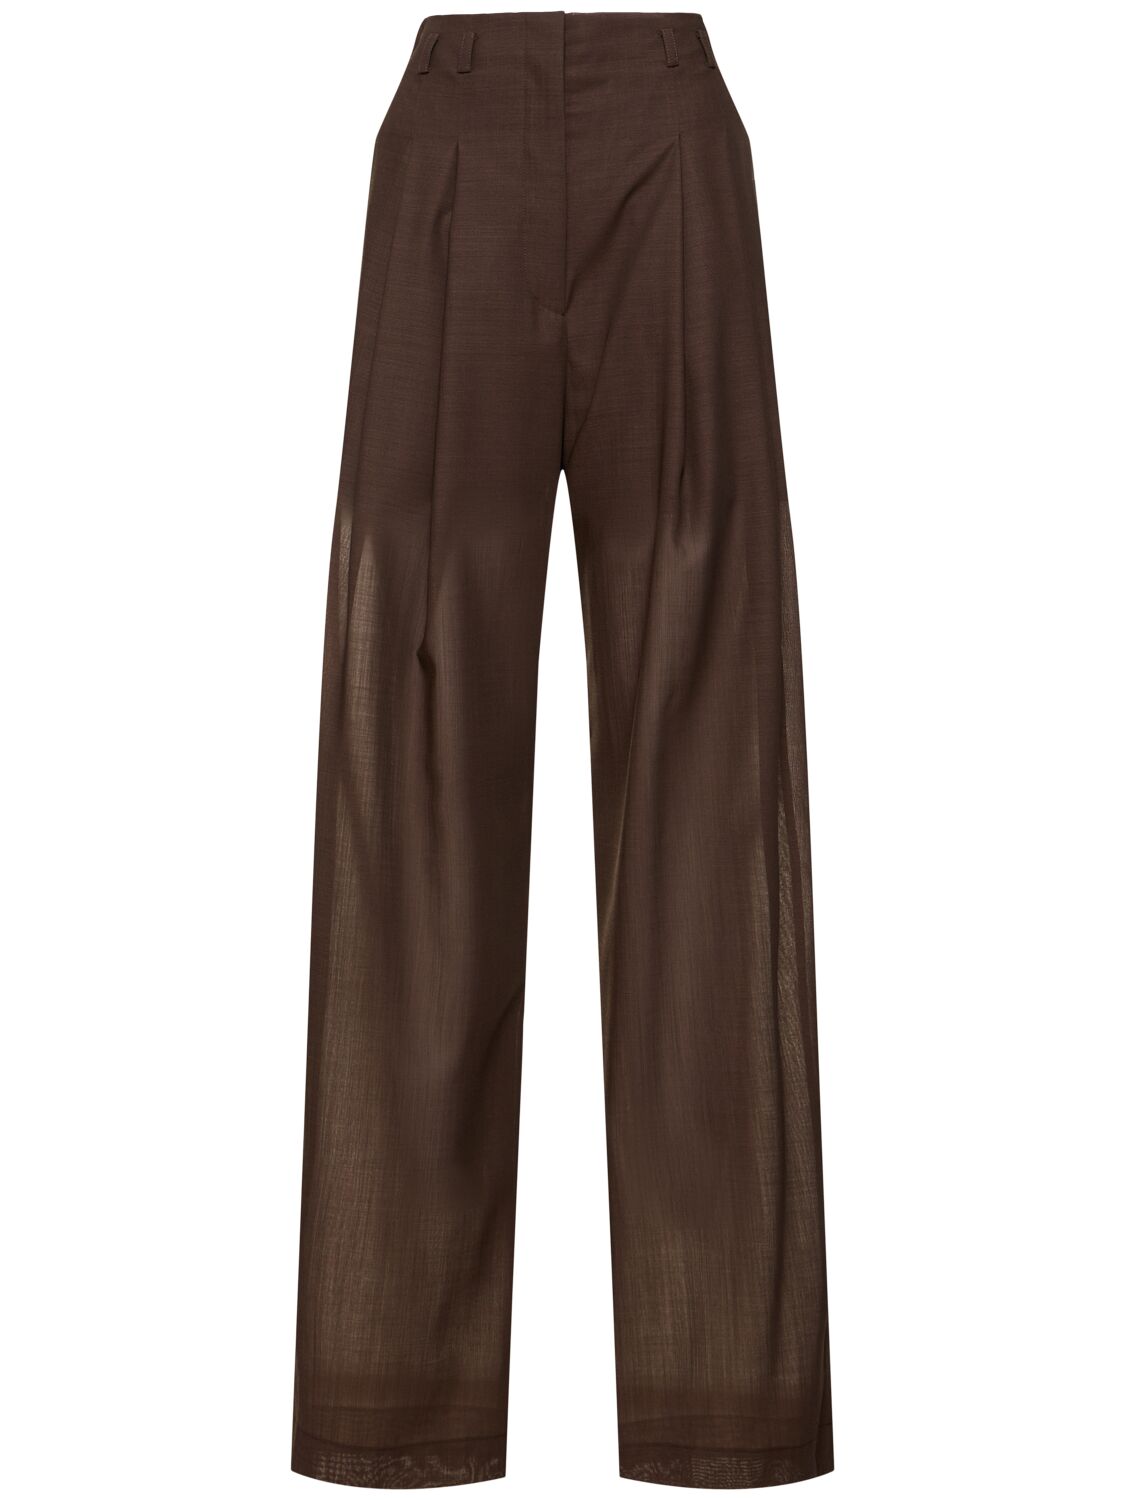 Image of Voile High Rise Pants